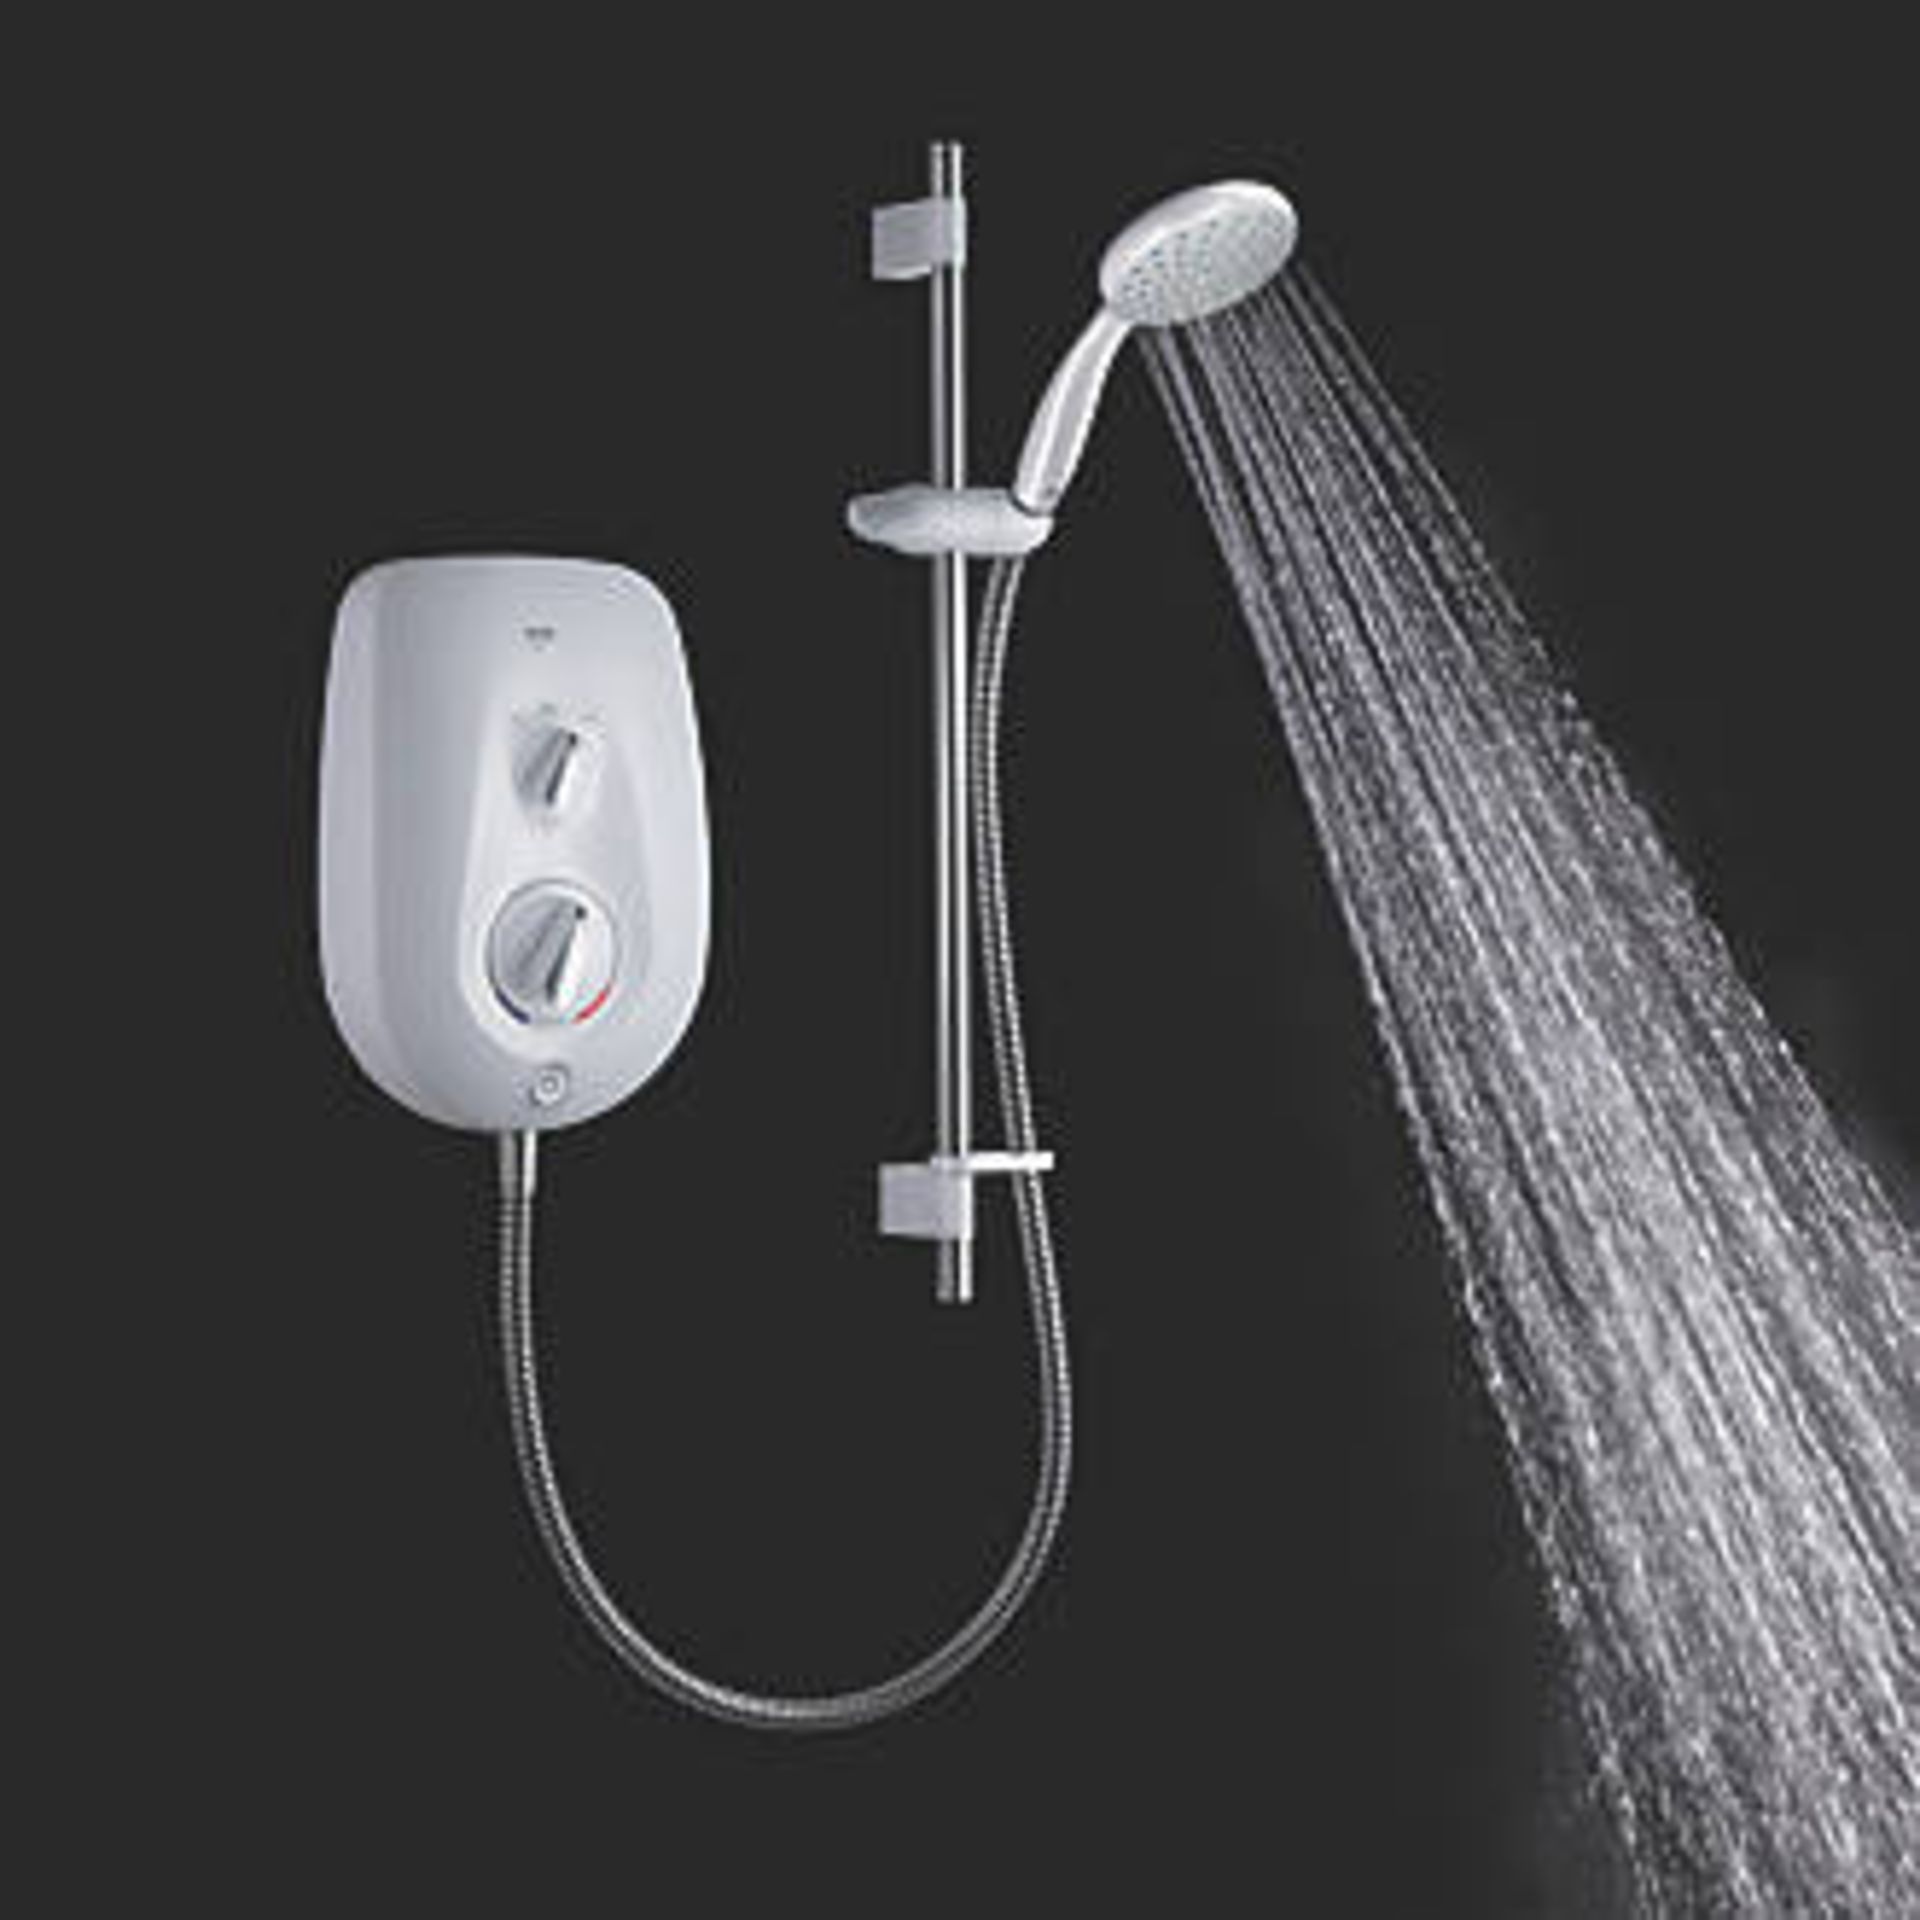 (XL67) Mira Go White 10.8kW Electric Shower. RRP £324.99. Contemporary electric shower with pr...(